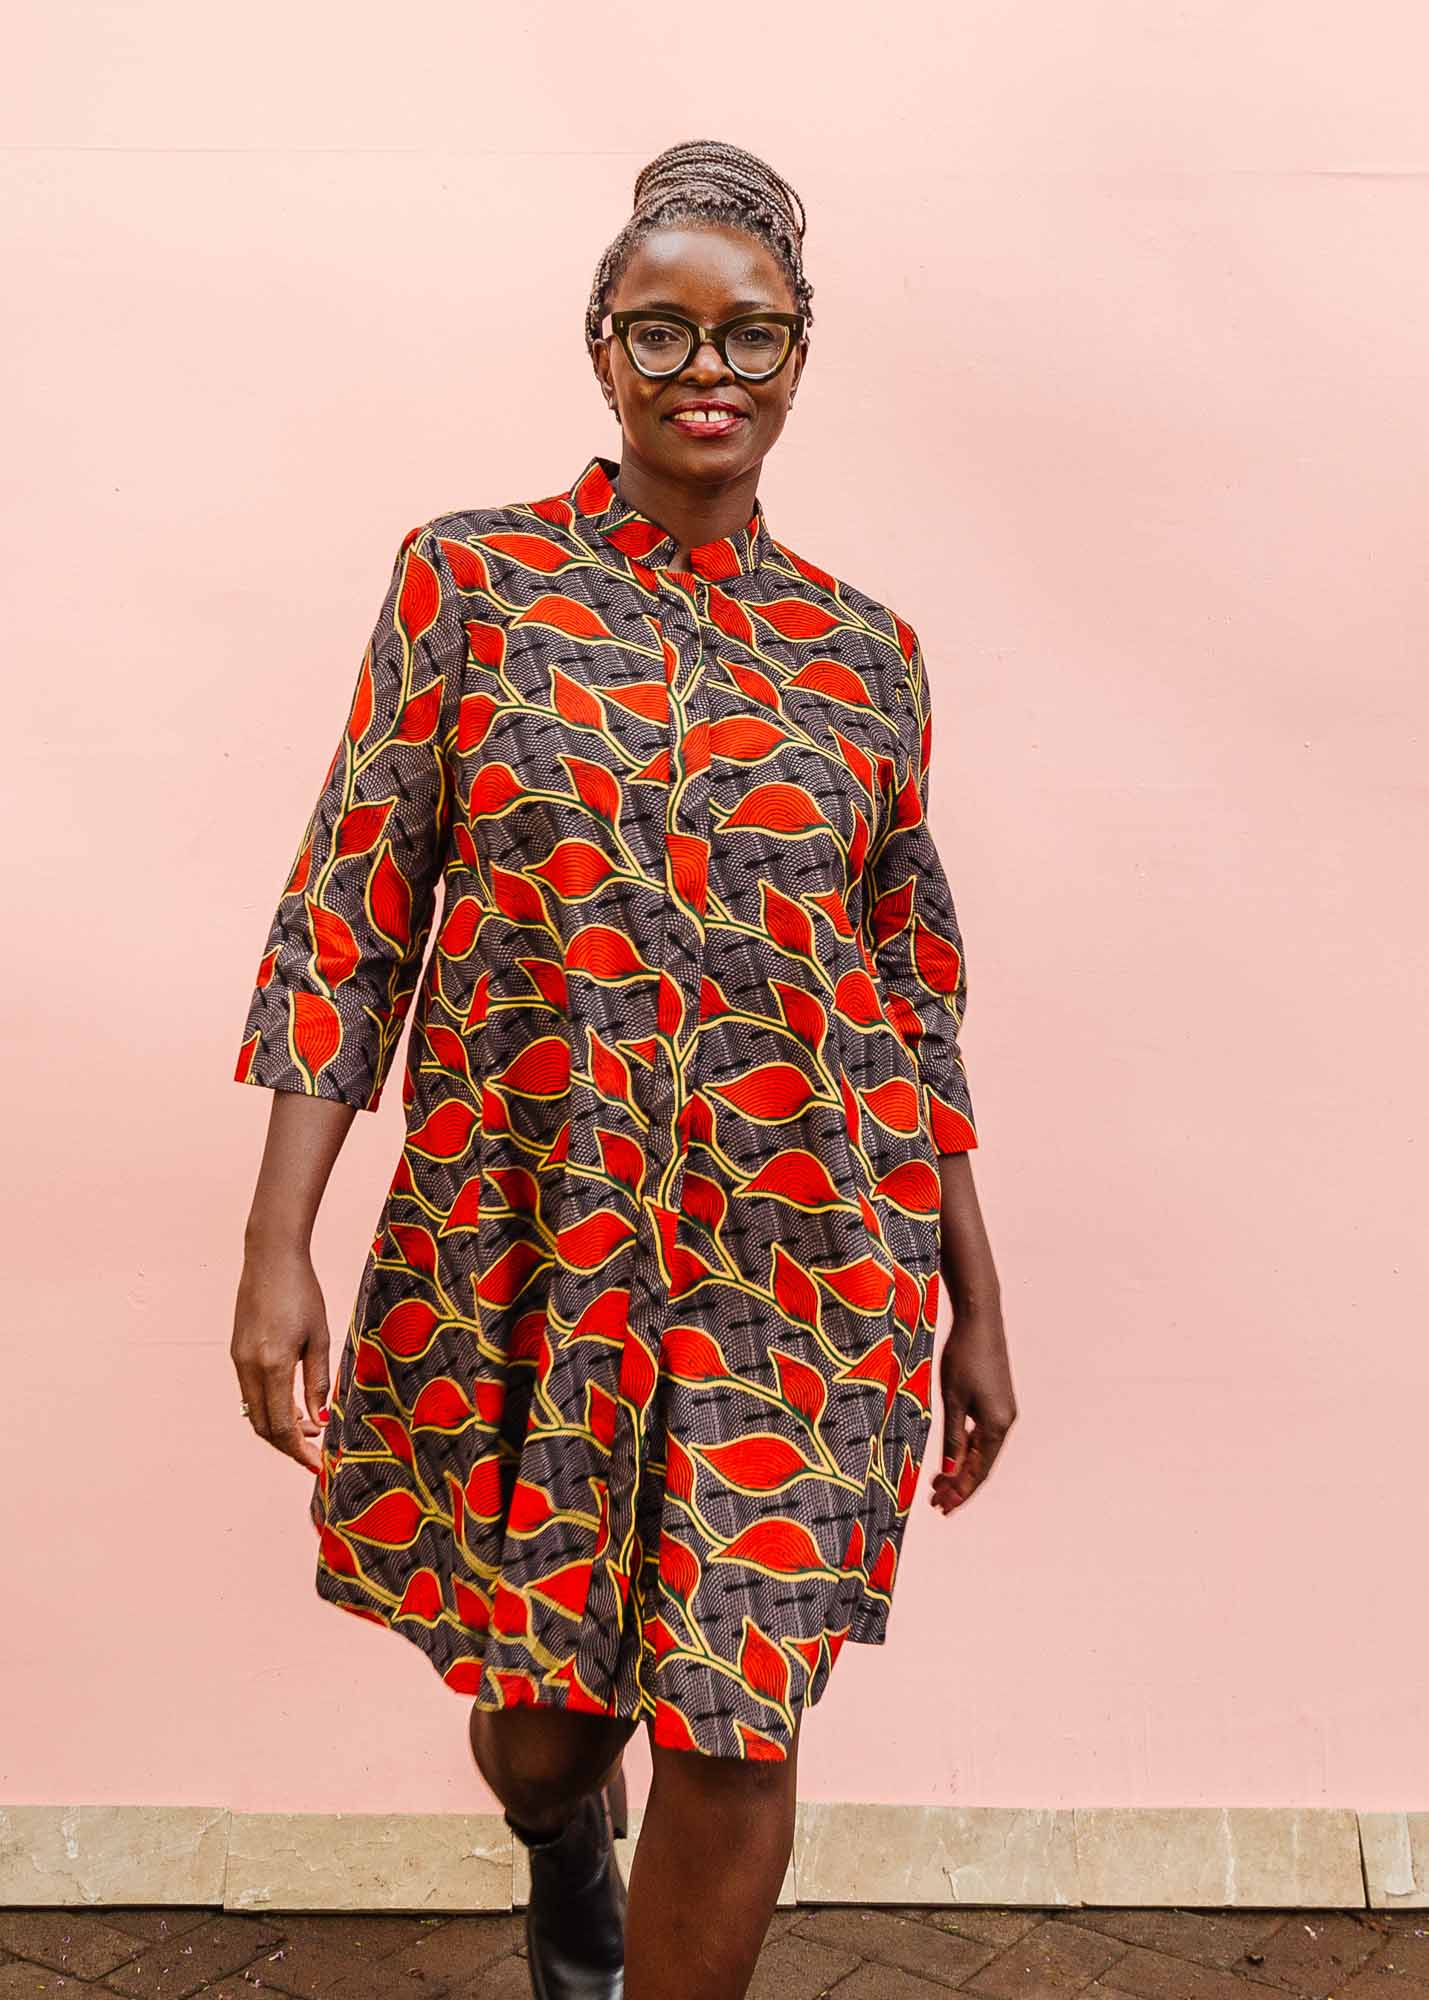 The model is wearing grey dress with red, yellow and black leaf print